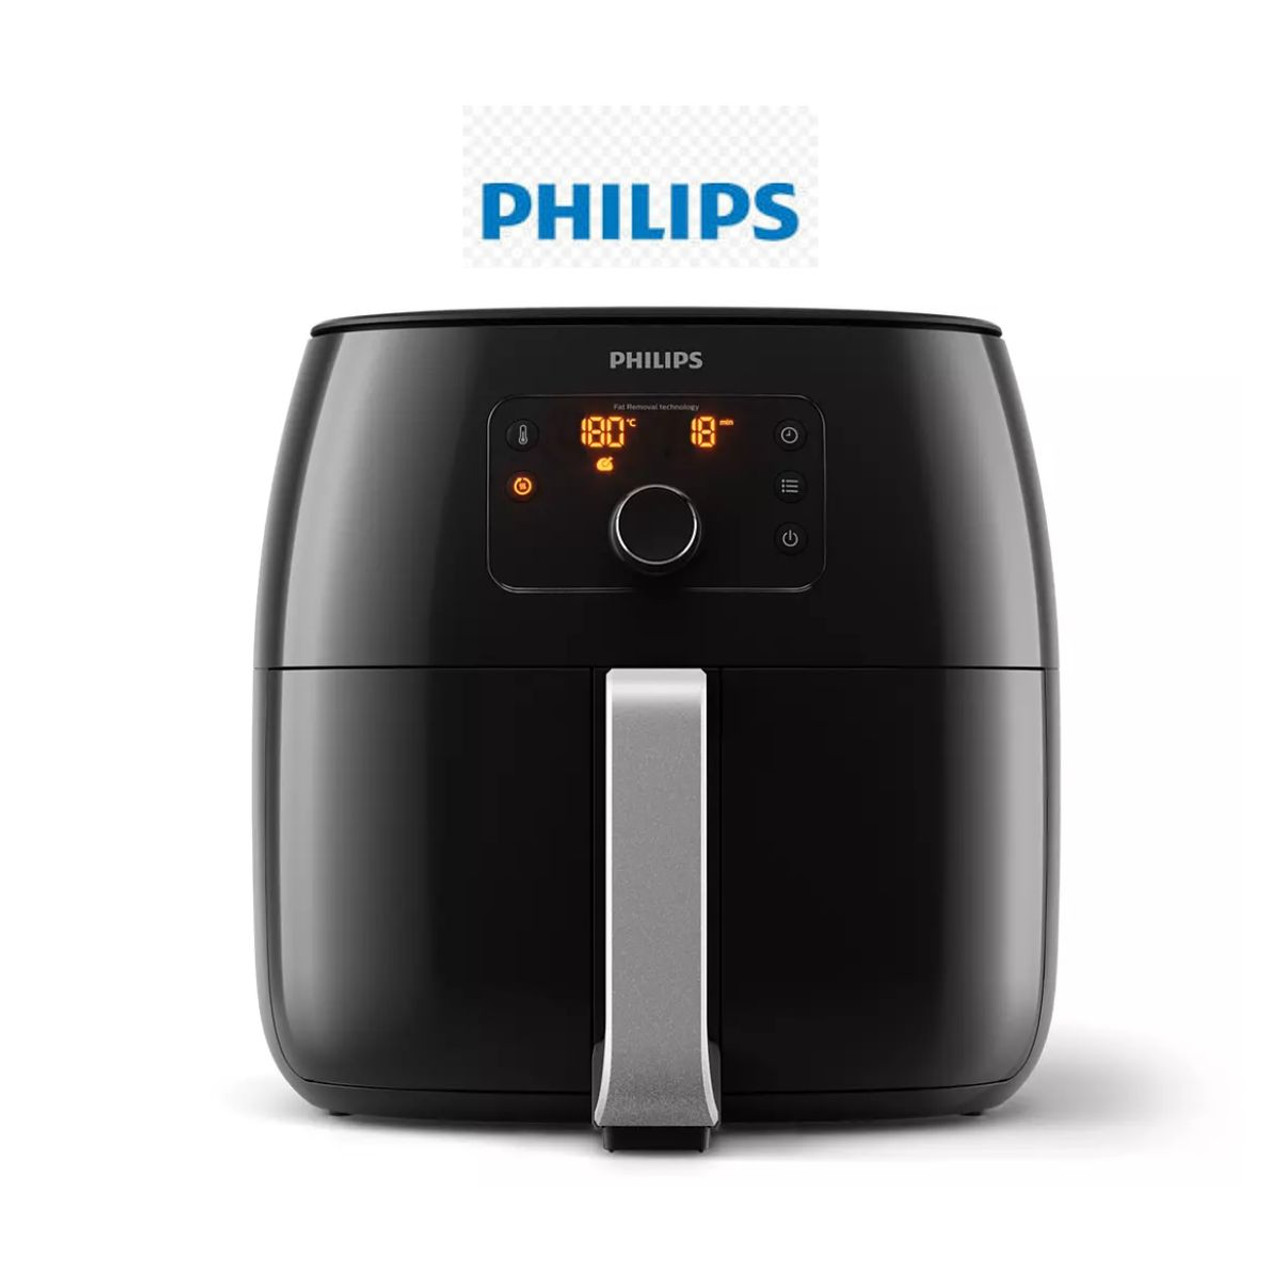 Philips Premium Digital XXL Airfryer with Fat Removal Technology